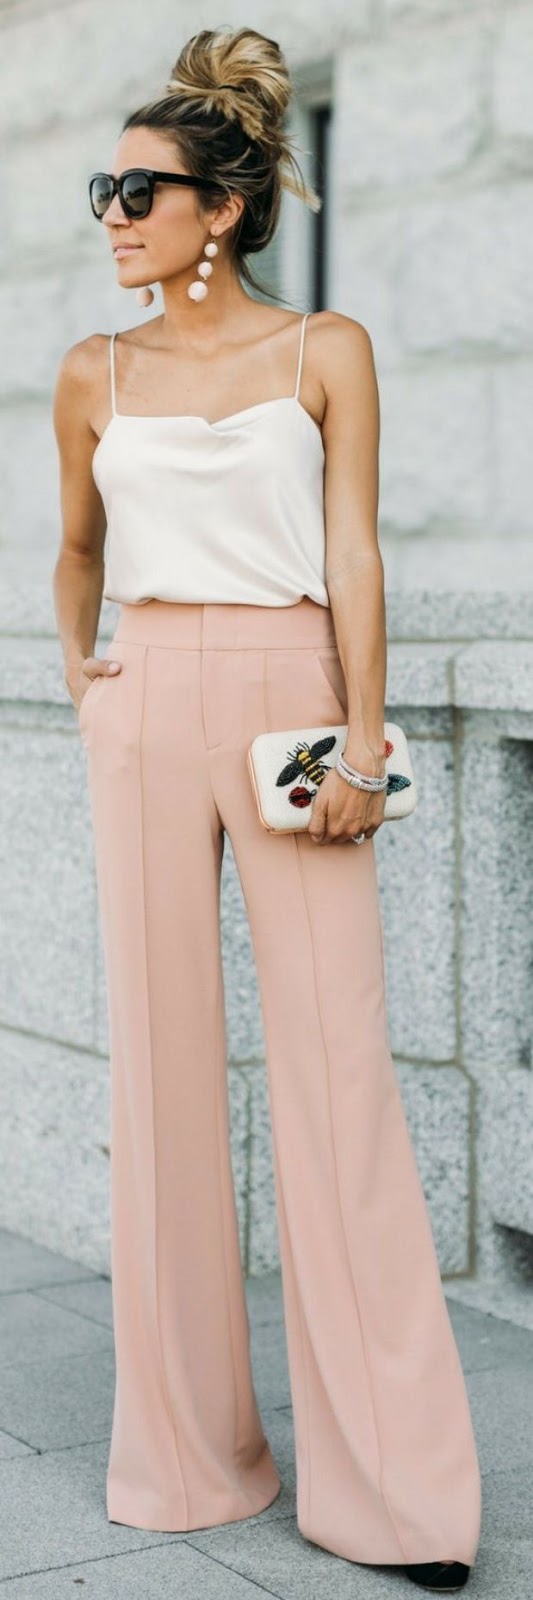 fashion trends | silk top + blush wide pants + embroidered clutch